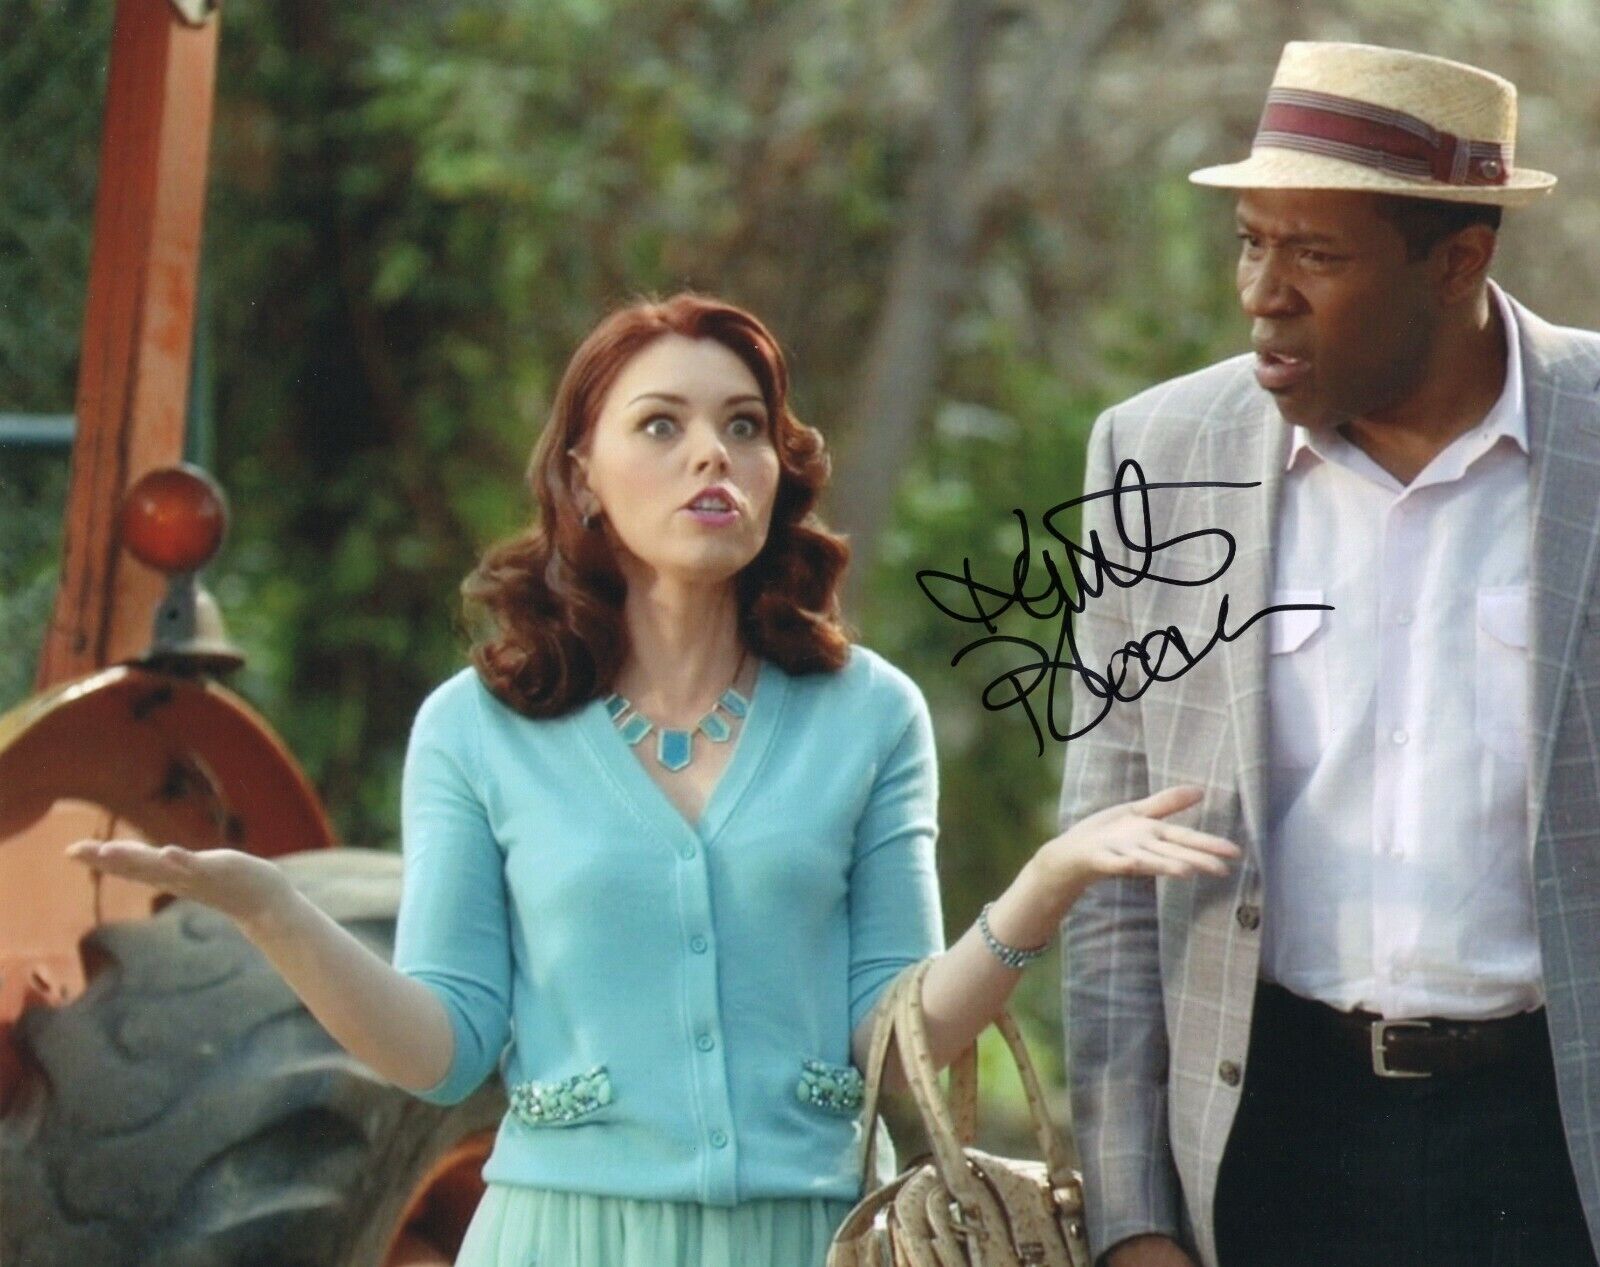 Kaitlyn Black CW Hart Of Dixie Annabeth Nass Signed 8x10 Photo Poster painting w /COA #3